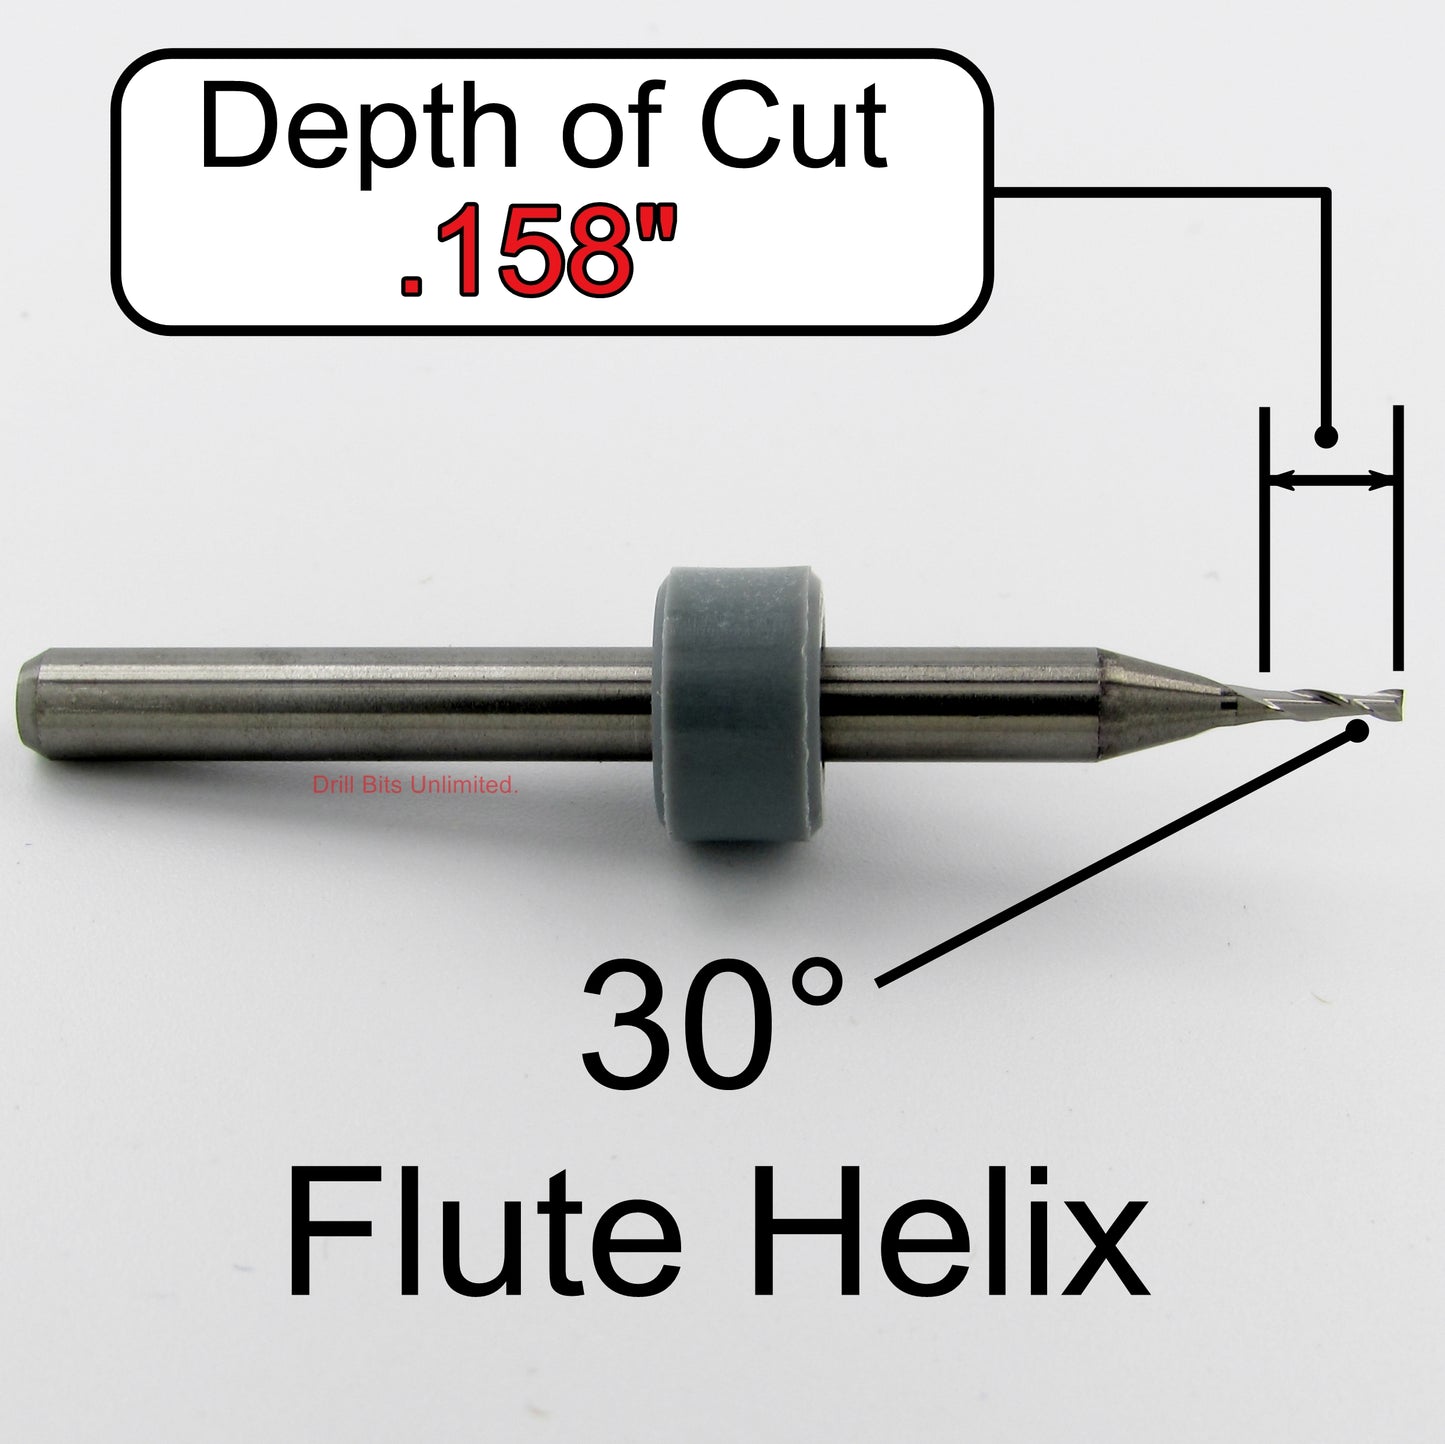 .0354" 0.90mm x .120" LOC Two Flute UP Cut Carbide End Mill Square End - Made in U.S.A. M205